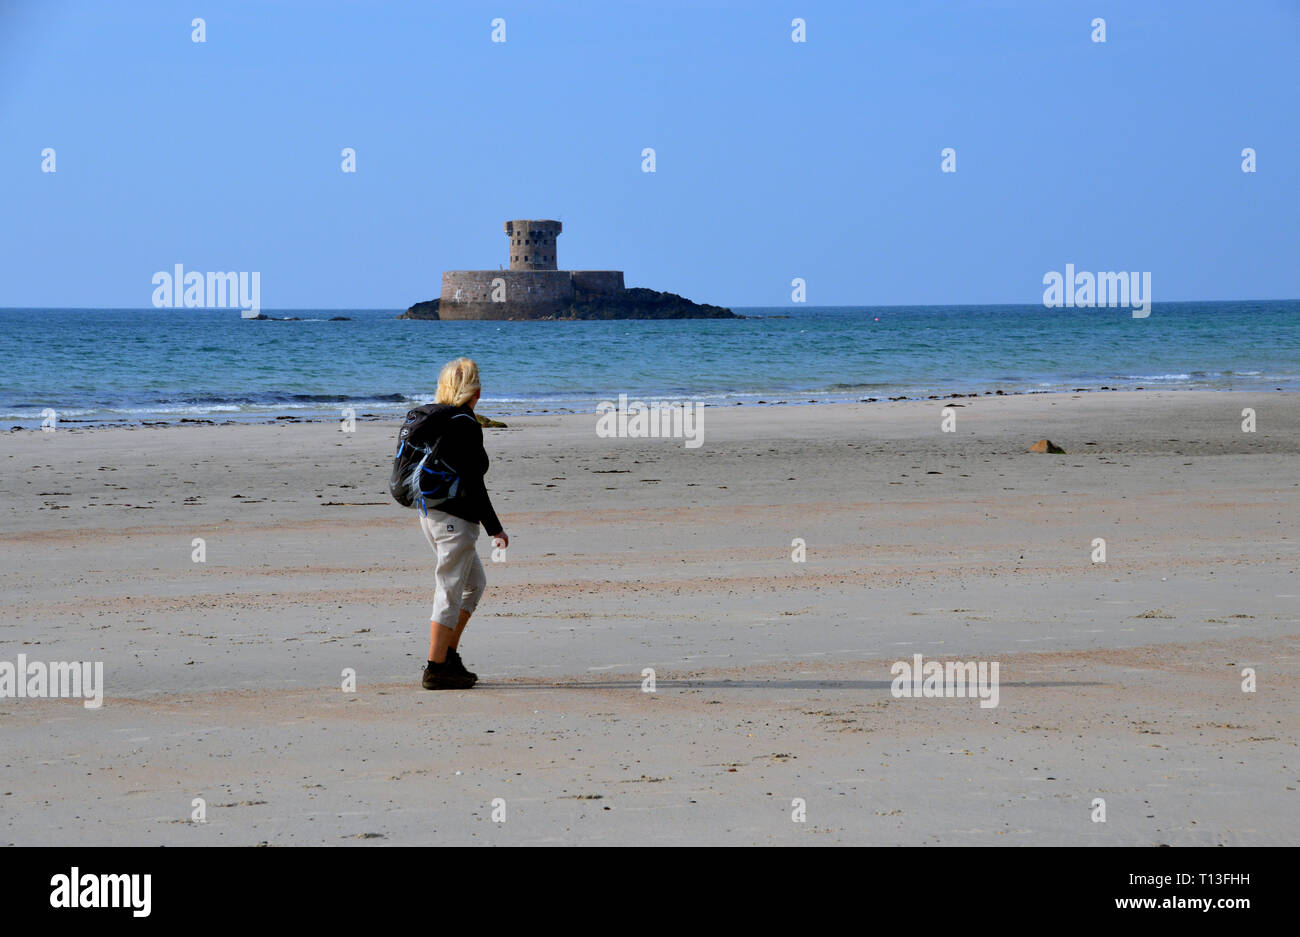 Woman Hiker Walking on the Beach near La Rocco Tower on an Tidal Island in St Ouen's Bay on the Island of Jersey, Channel Isles, UK. Stock Photo